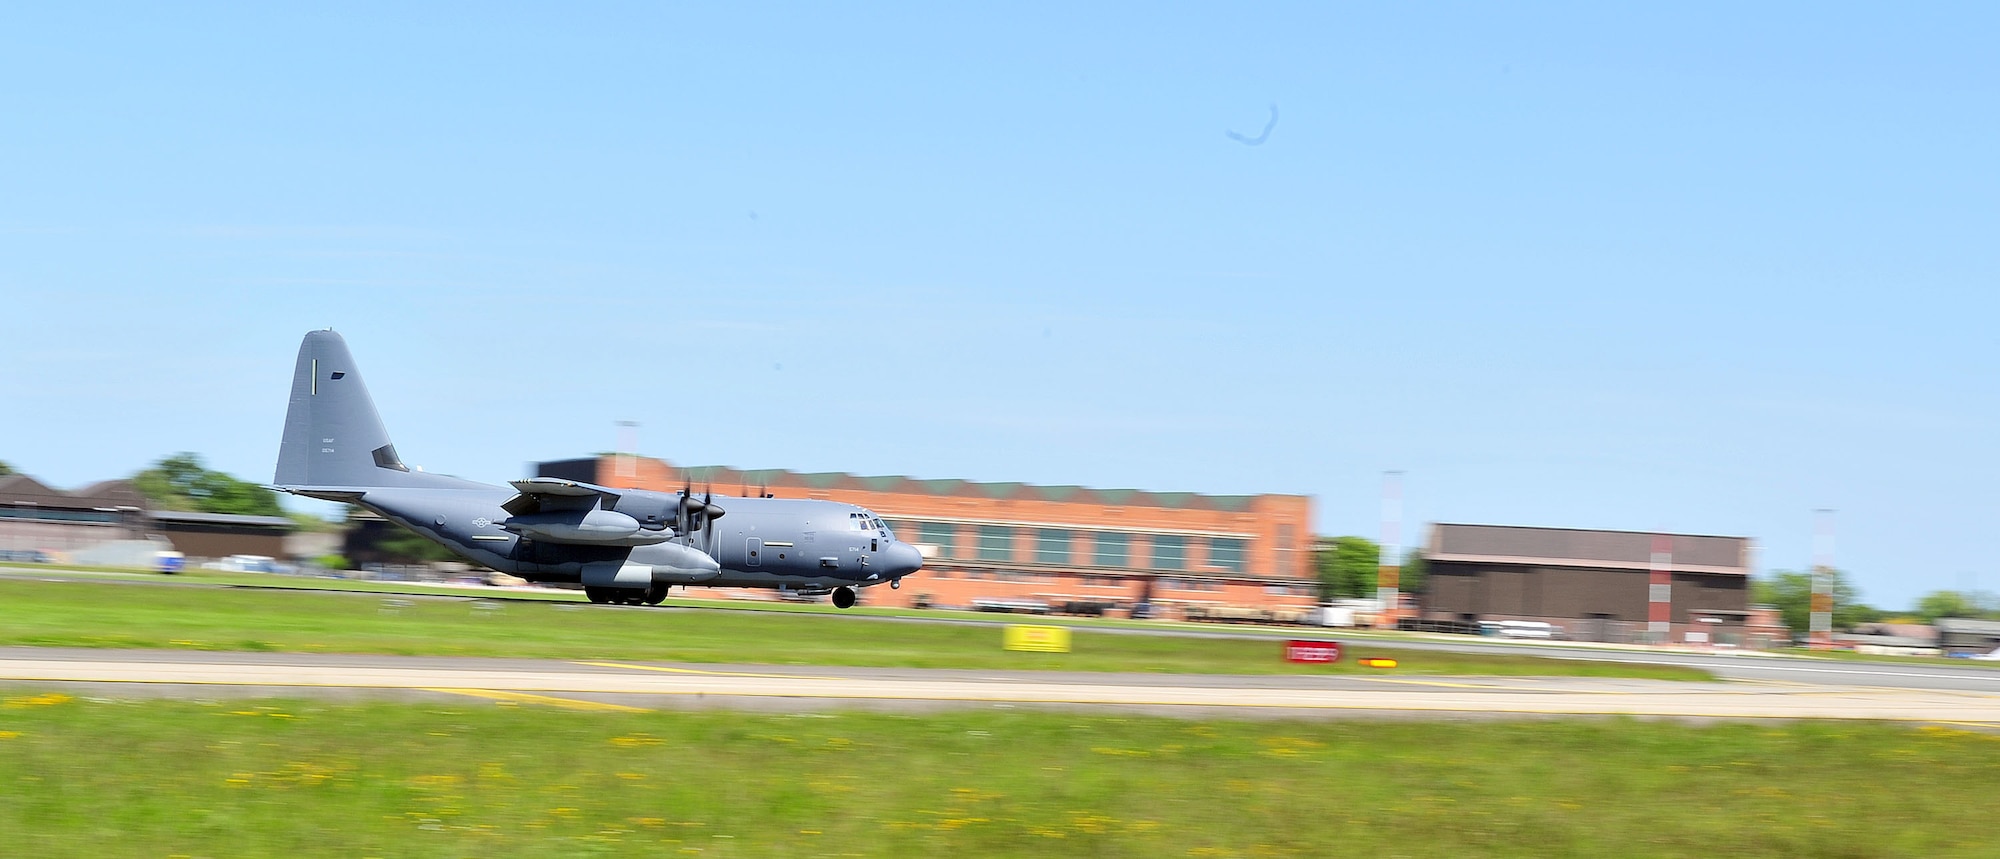 The first MC-130J Commando II belonging to the 67th Special Operations Squadron lands June 7, 2013, on RAF Mildenhall, England. The MC-130J is the first of 12 coming to the 352nd Special Operations Group. The MC-130J variation allows the military to perform low-level infiltration and exfiltration, as well as aerial delivery, resupply of forces and ground refueling. (U.S. Air Force photo by Tech. Sgt. Stacia Zachary/Released)